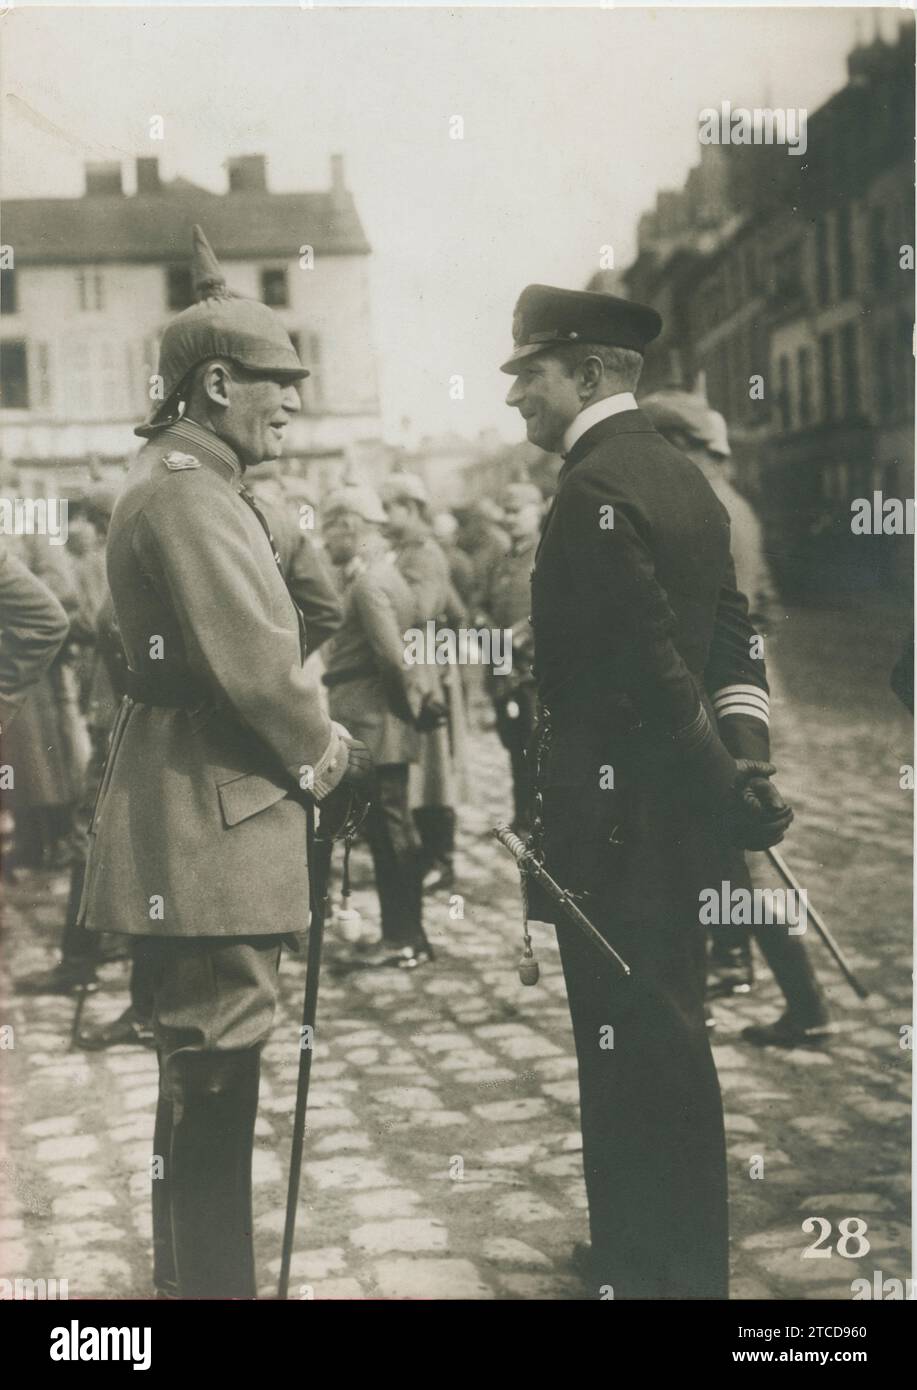 France, 1914 (CA.). General Von Einem, former Minister of War, with Prince Adalbert, son of Kaiser William, during a meeting in a French villa. Credit: Album / Archivo ABC / Charles Trampus Stock Photo